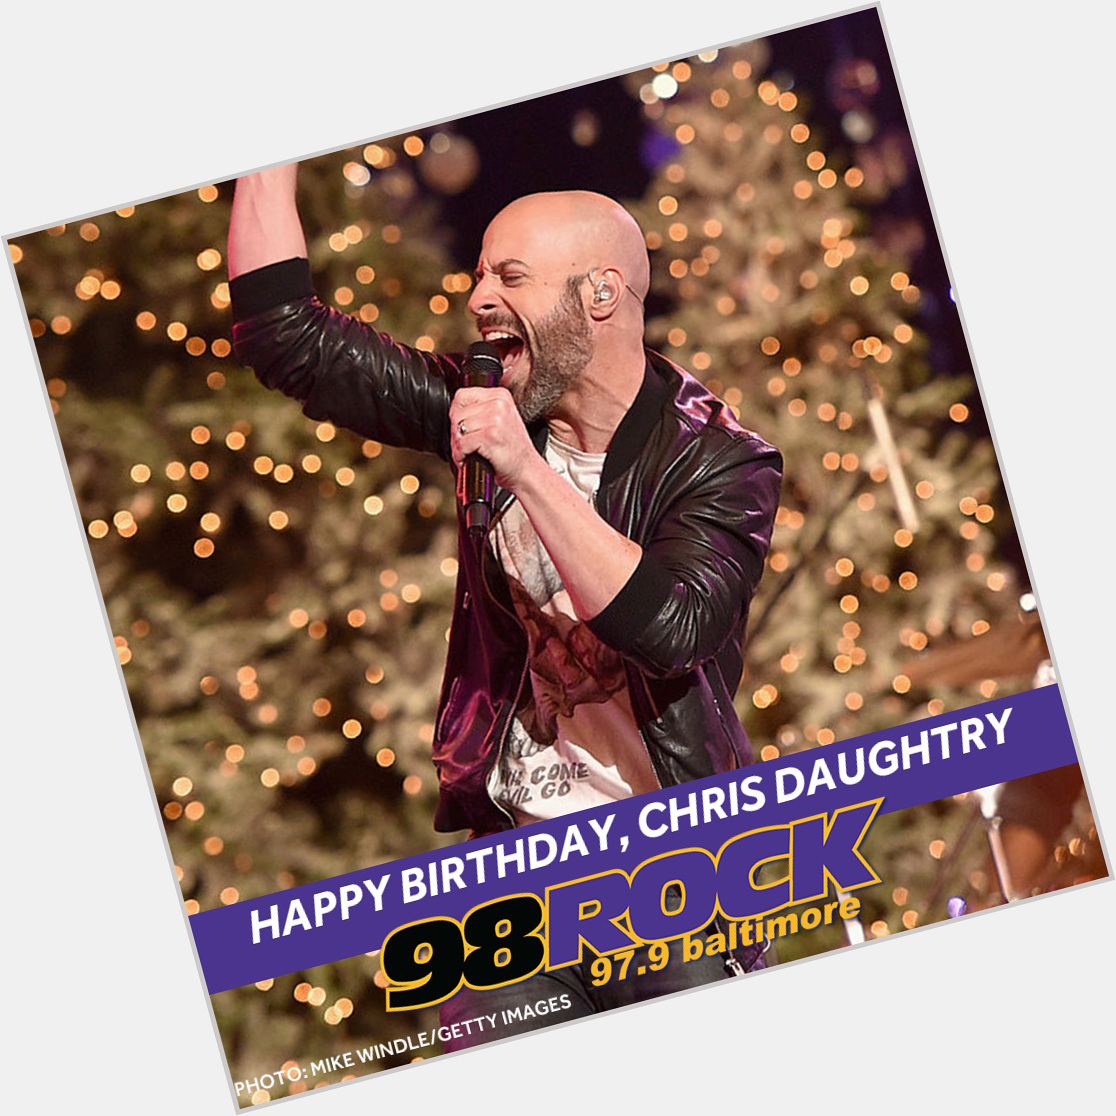 Happy Birthday to Chris Daughtry! Another reason to celebrate the day after Christmas 